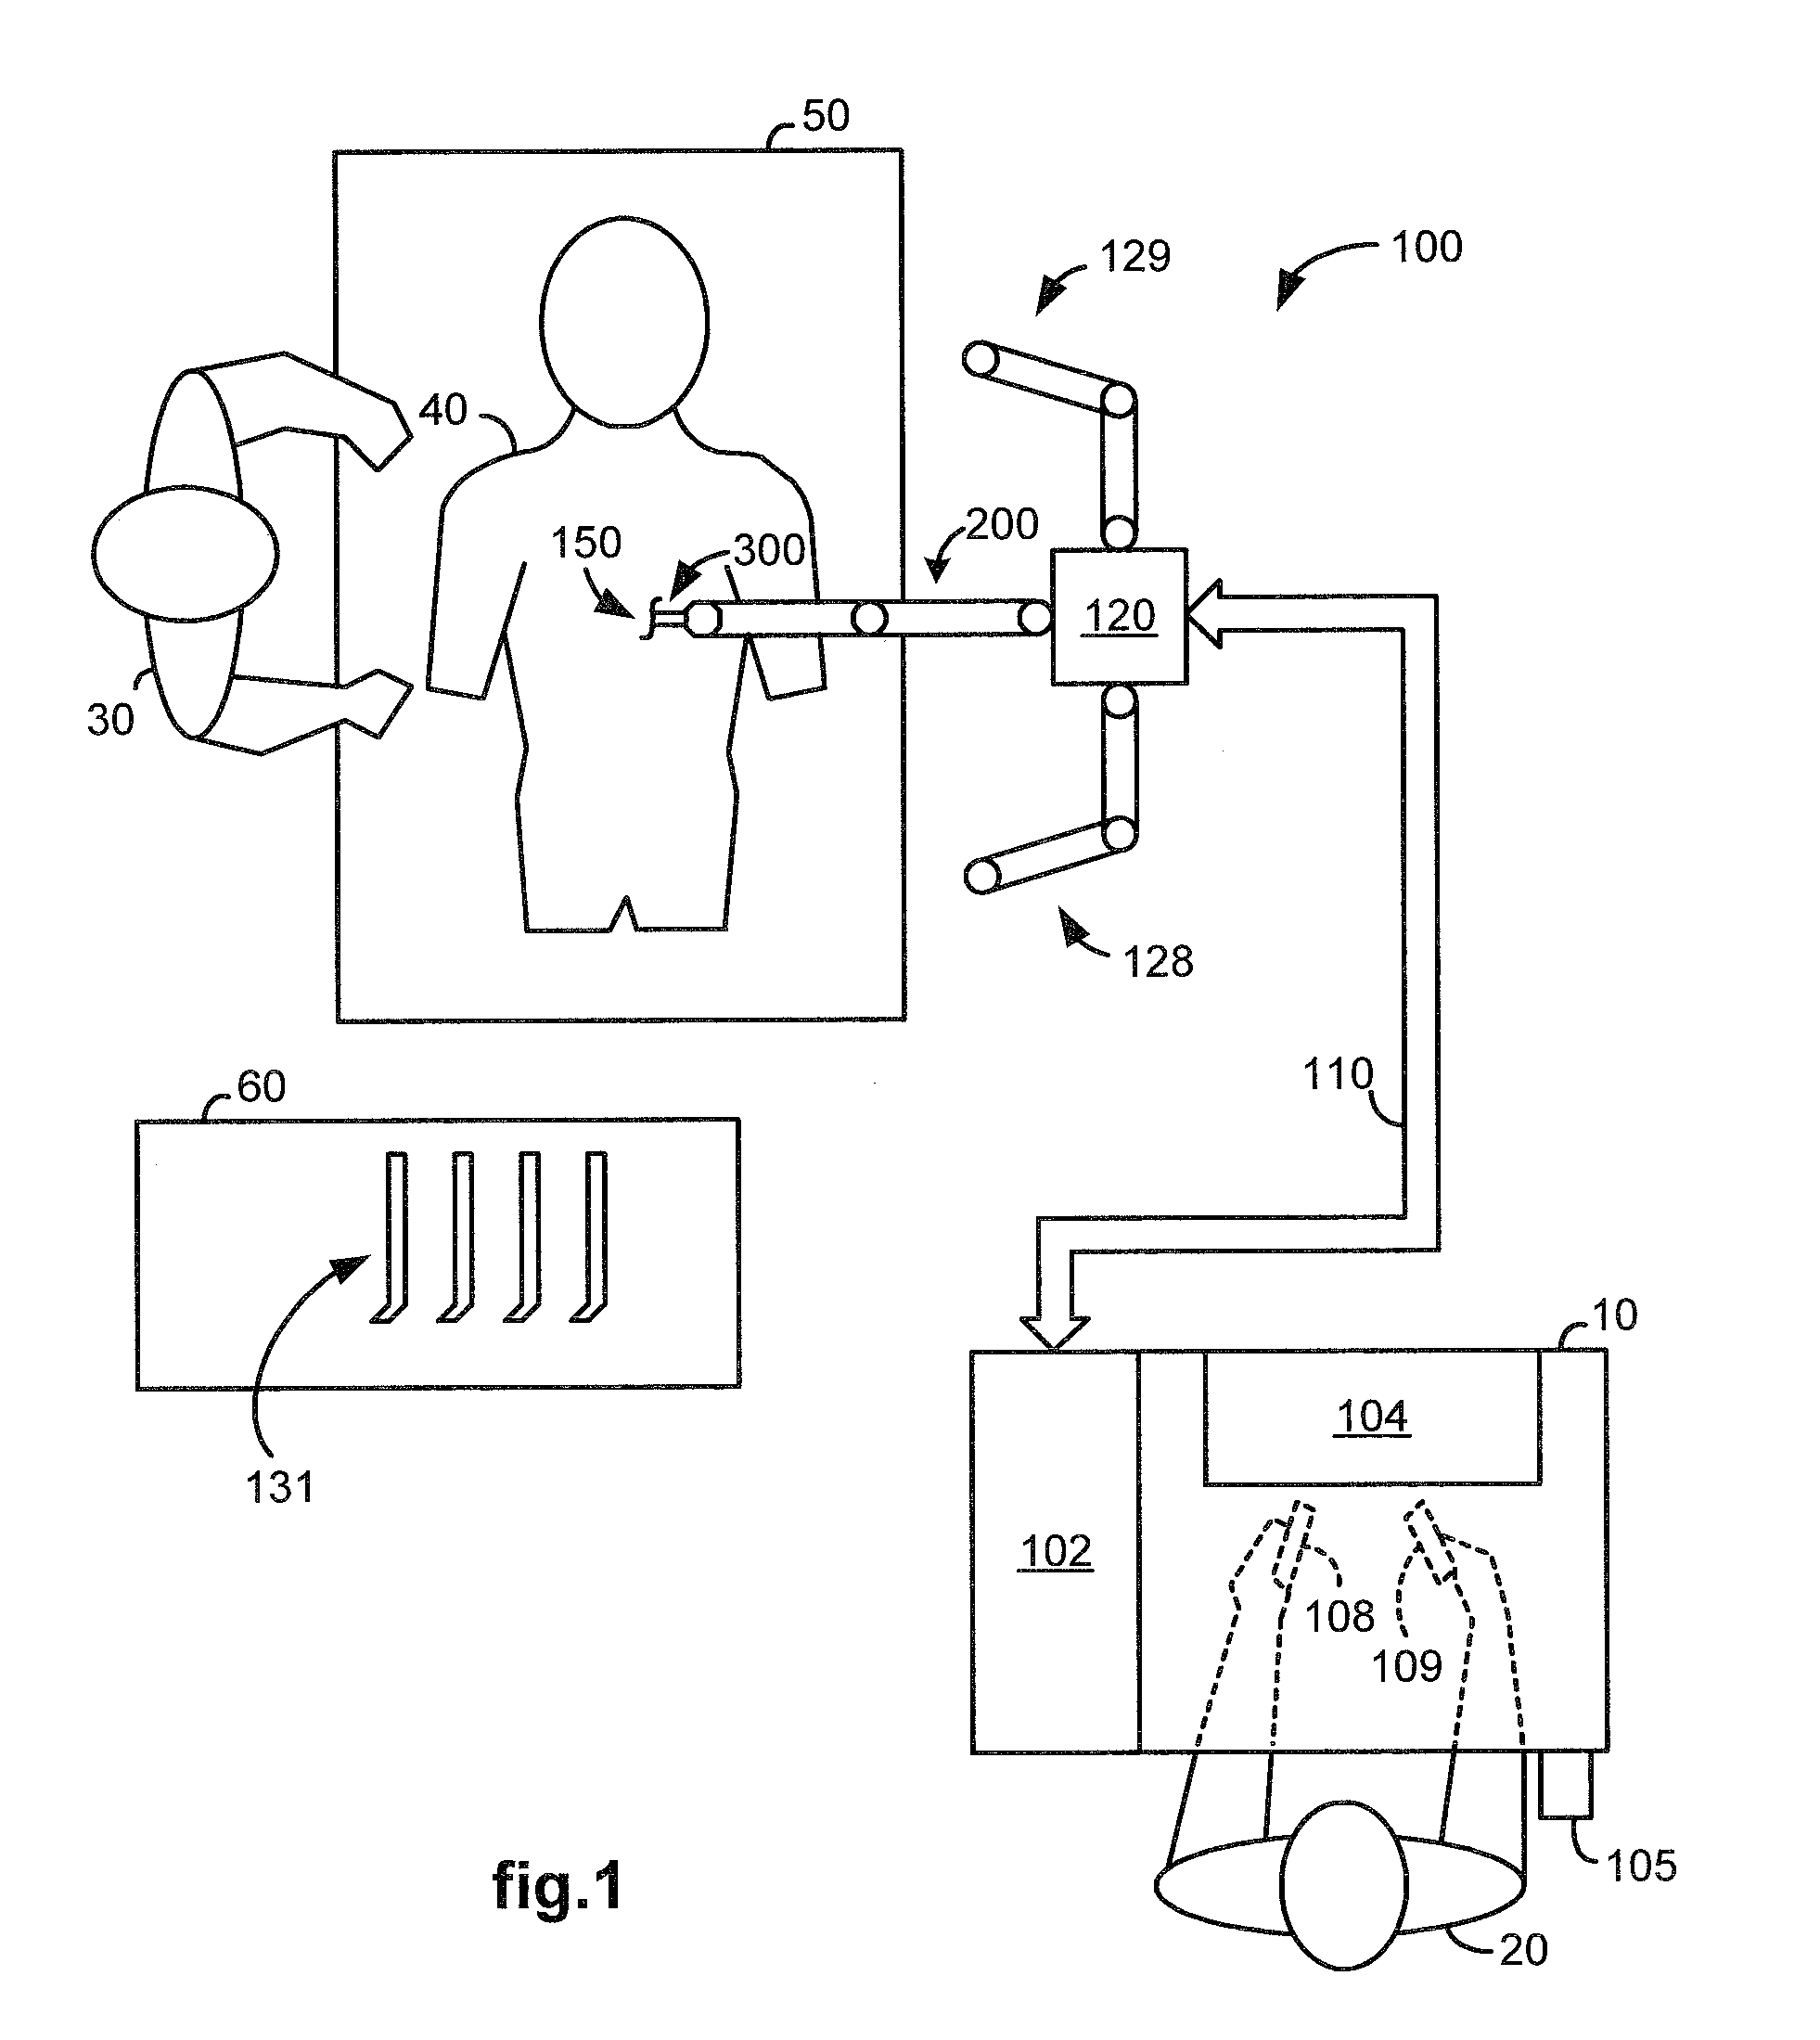 Extendable suction surface for bracing medial devices during robotically assisted medical procedures